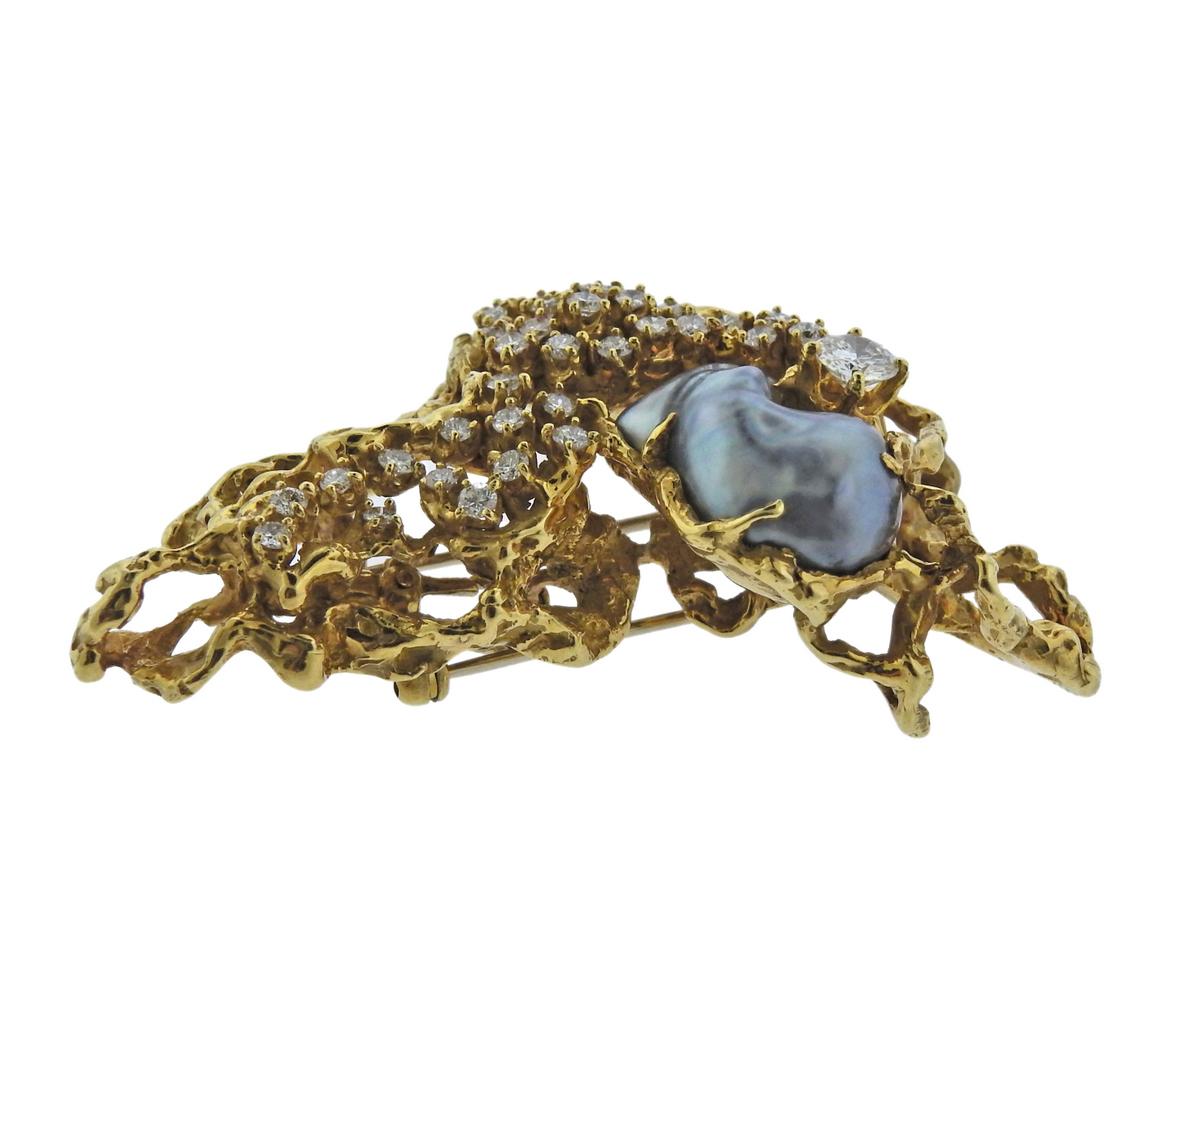 Large 18k yellow gold free form brooch, crafted by Arthur King, set with pearls and approx. 1.50ctw in G/VS diamonds. Brooch is 56mm x 42mm, weight is 44.5 grams.